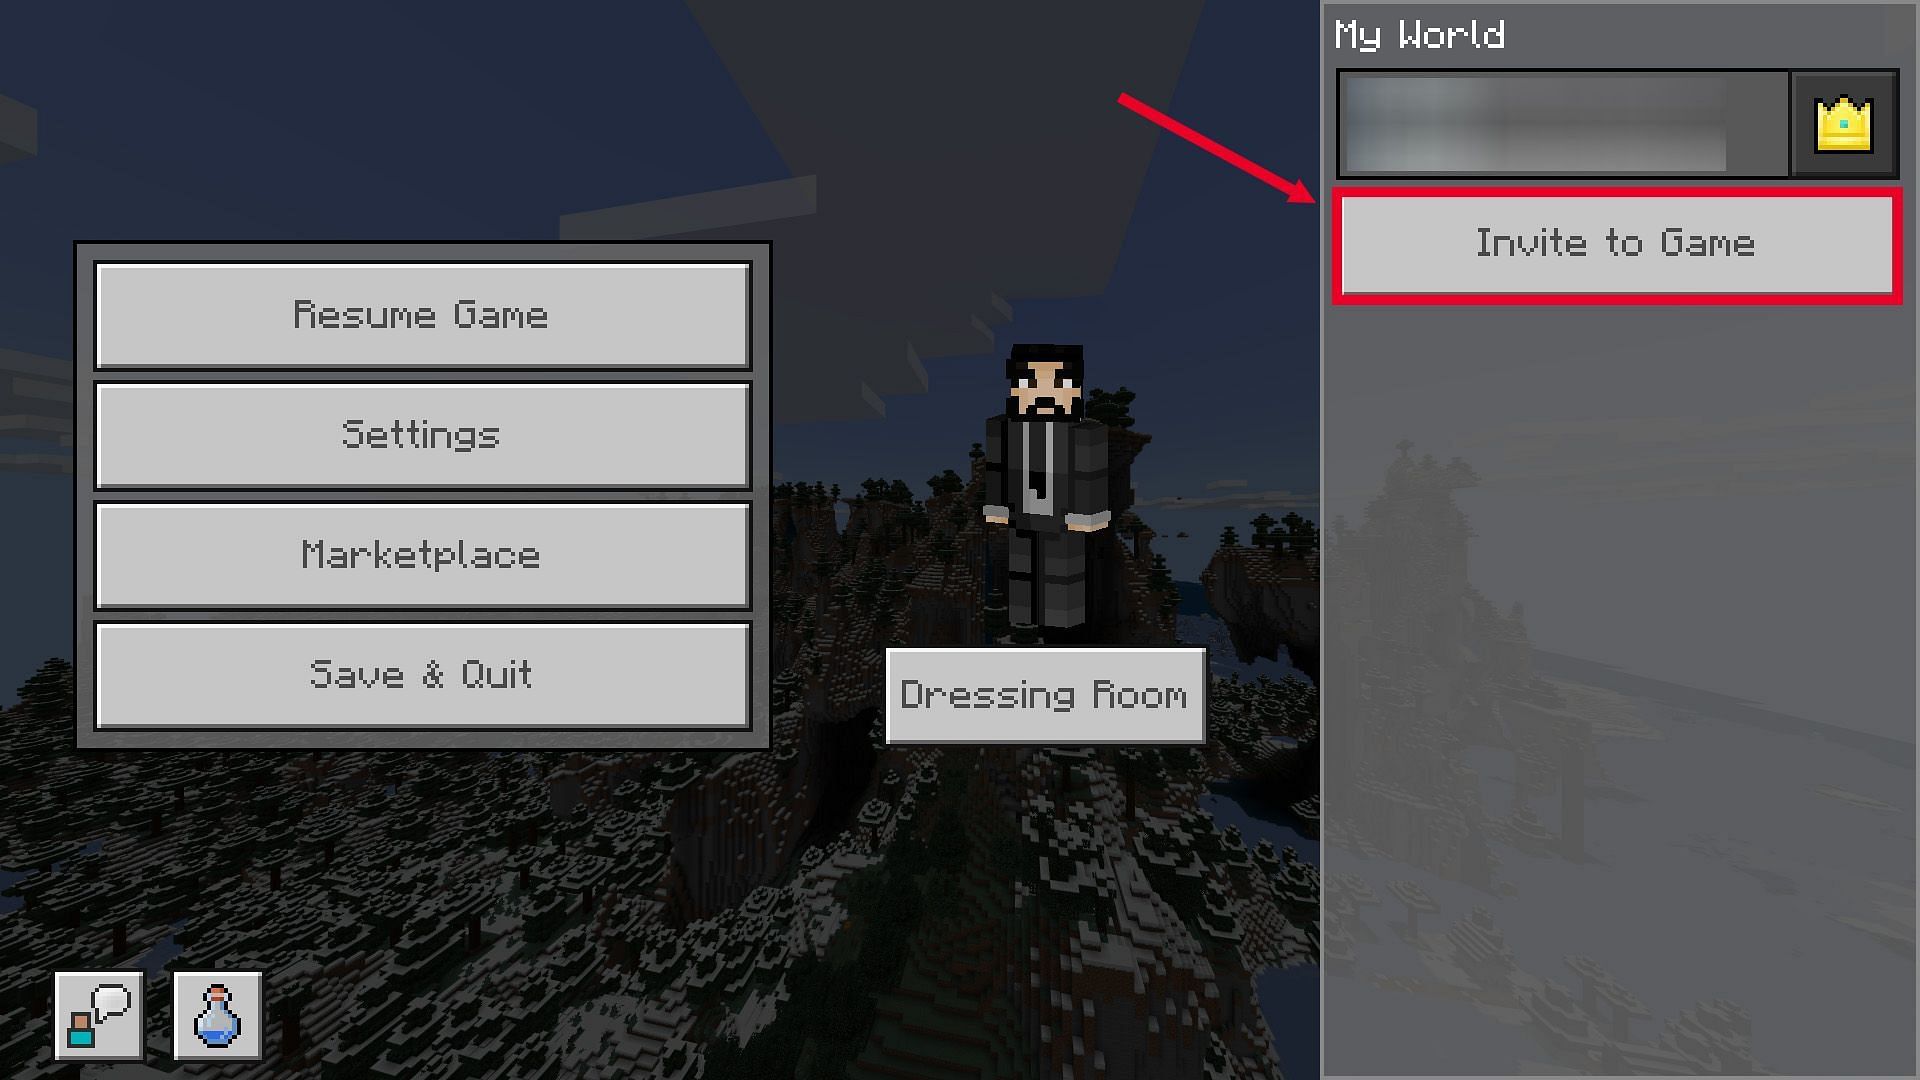 Access the settings to invite your friends in the world (Image via Mojang)